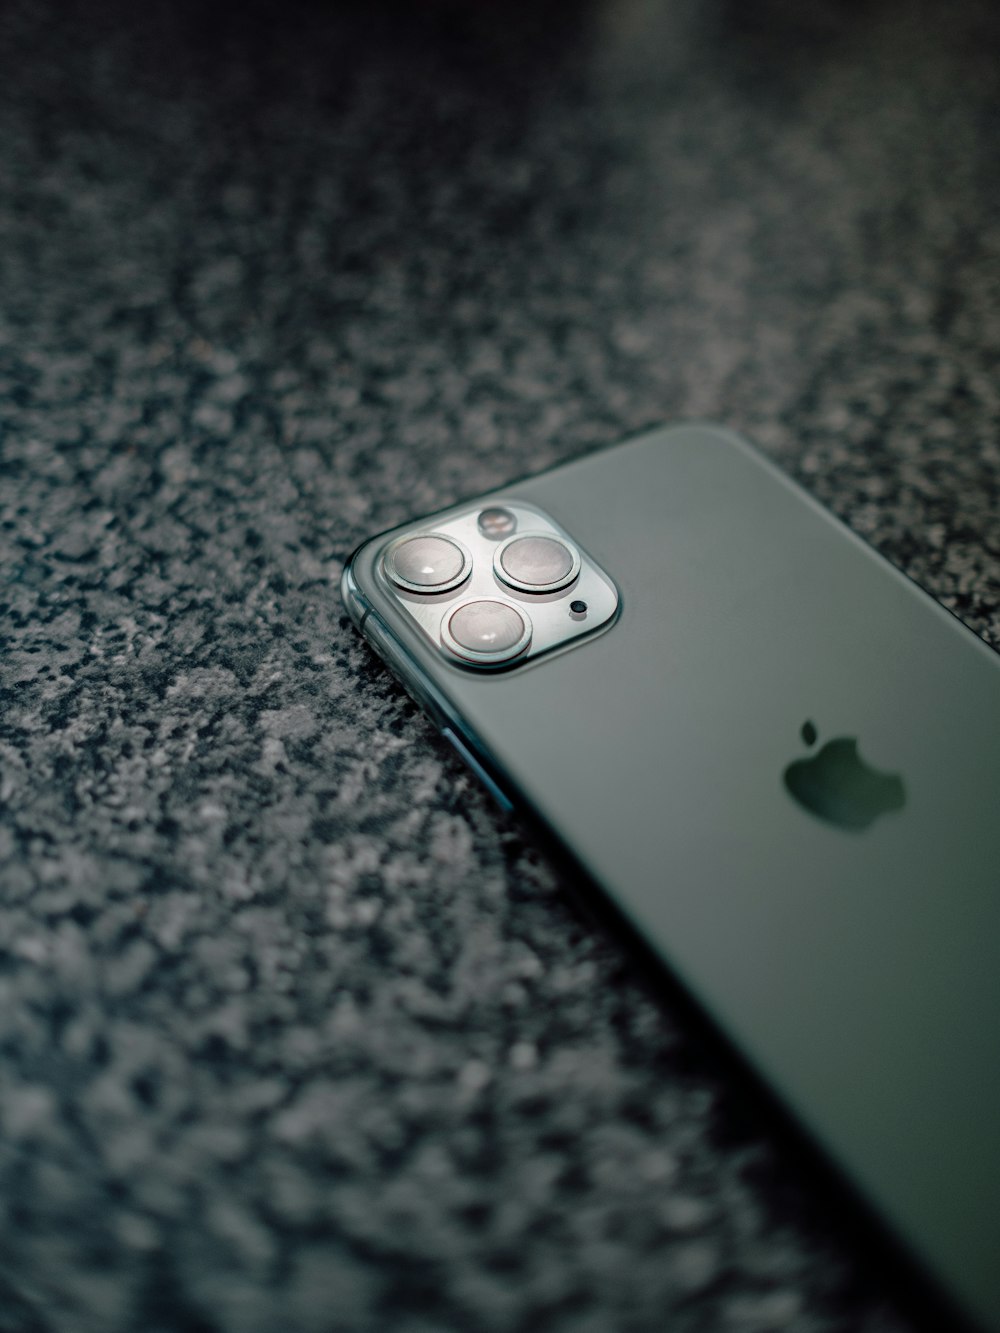 Iphone 11 Pro Midnight Green Pictures Download Free Images On Unsplash